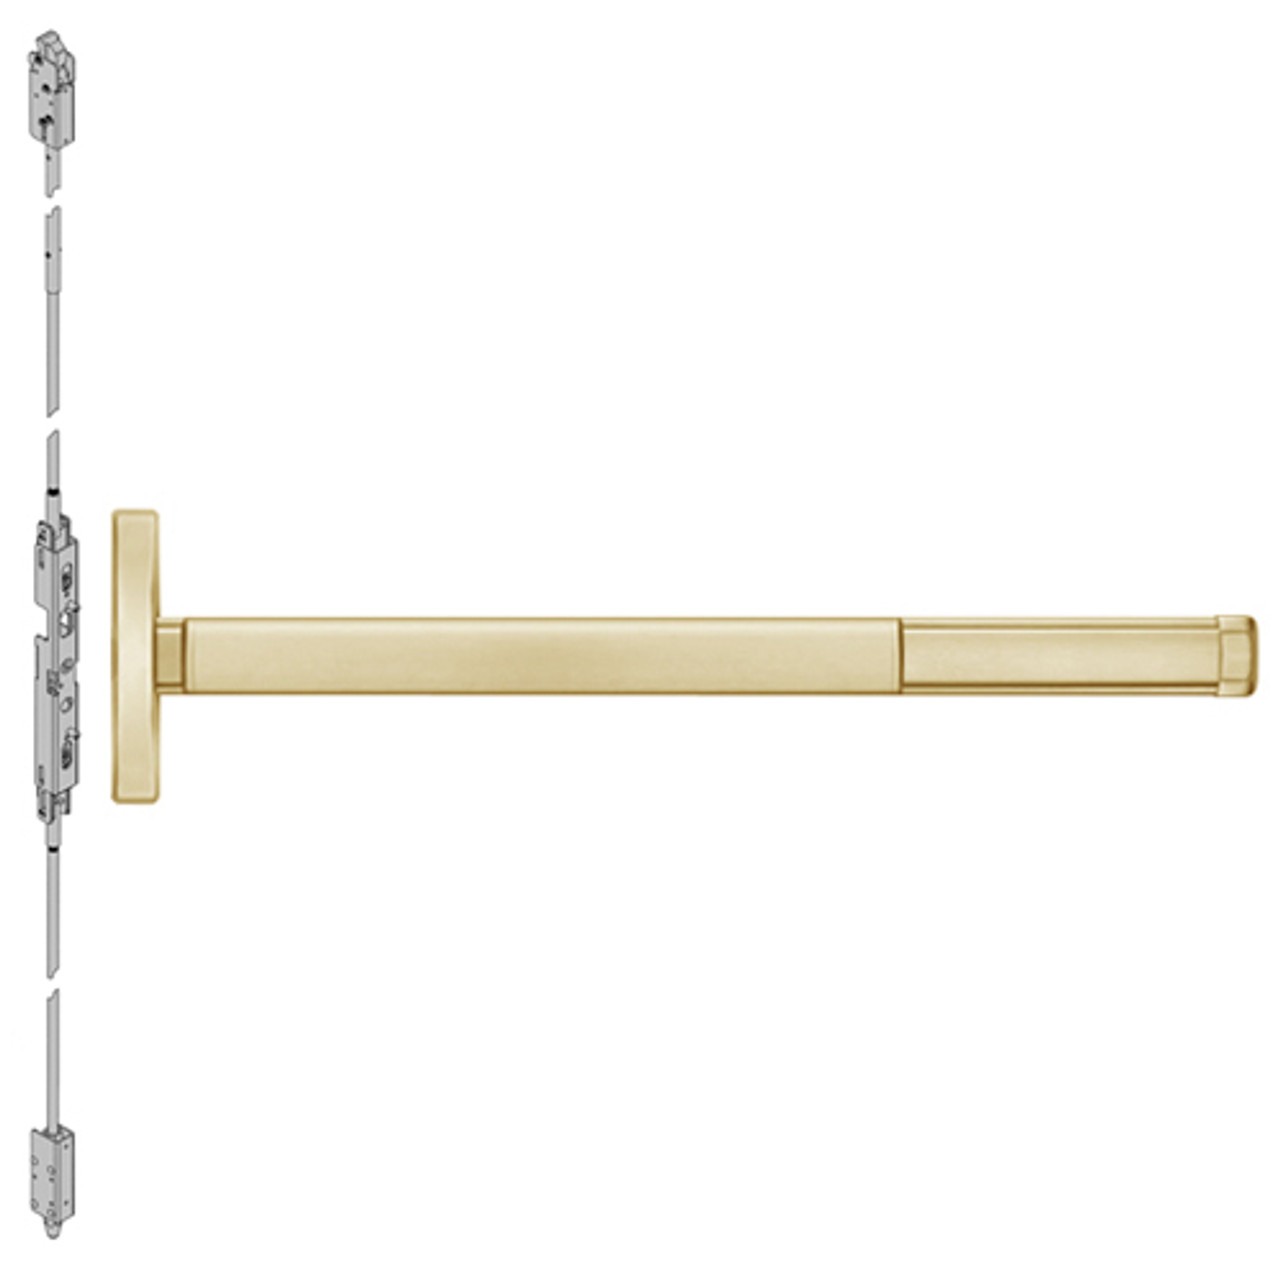 TSFL2603LBR-606-48 PHI 2600 Series Fire Rated Concealed Vertical Rod Exit Device with Touchbar Monitoring Switch Prepped for Key Retracts Latchbolt in Satin Brass Finish